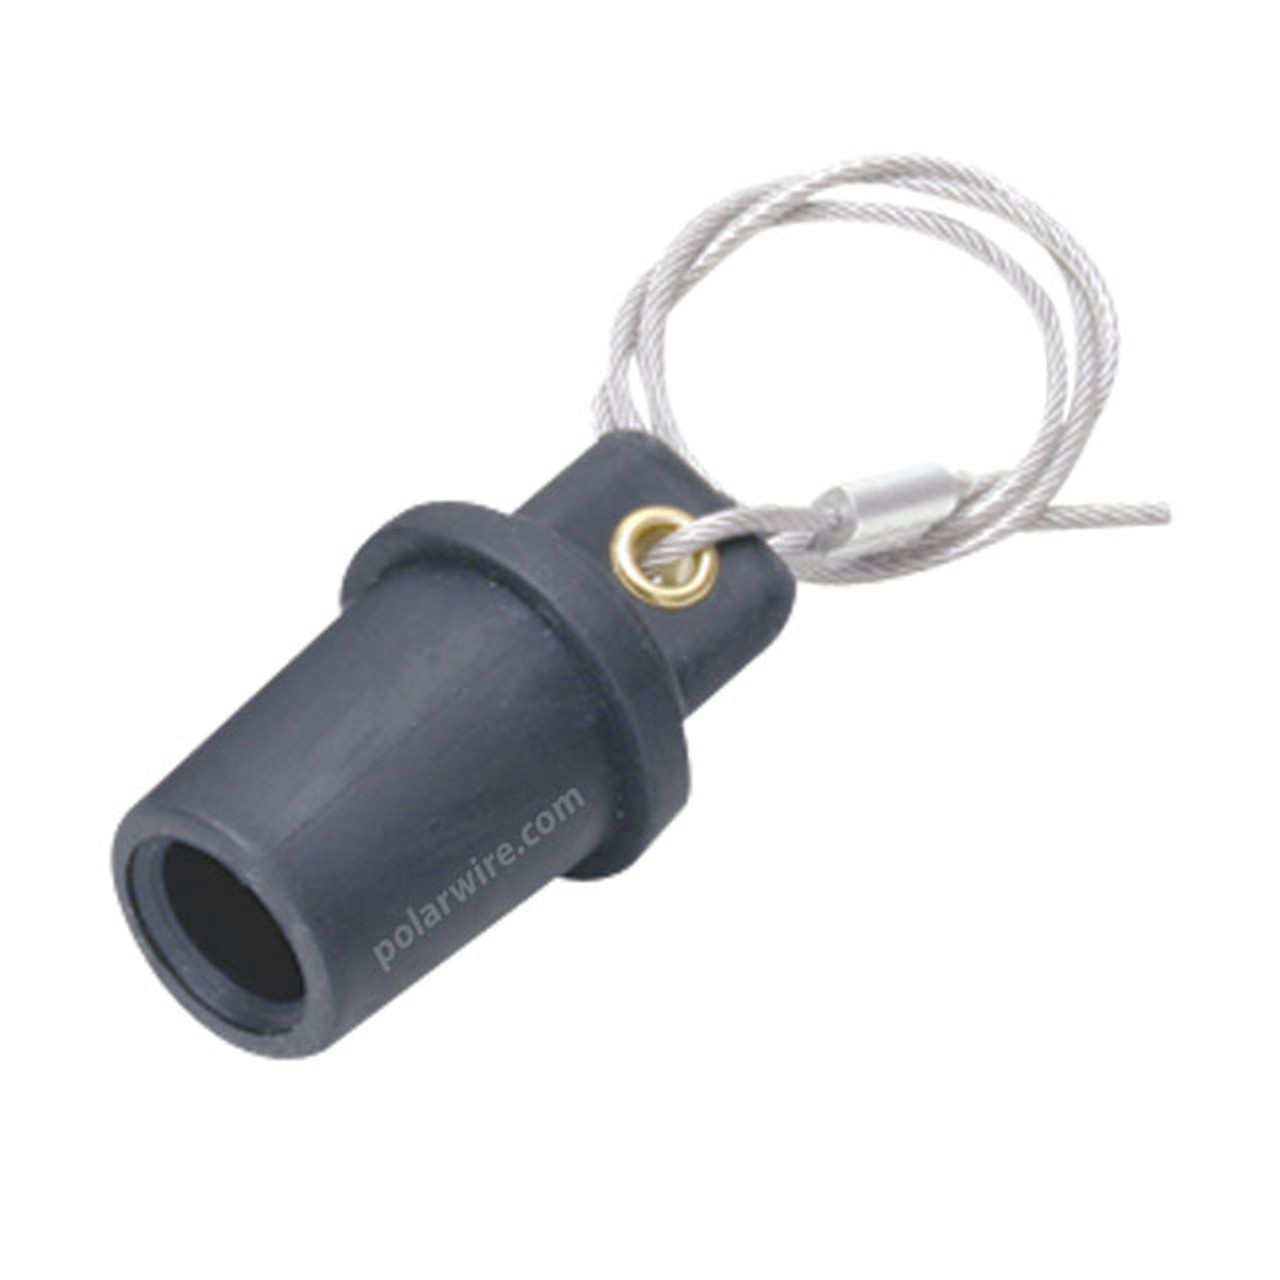 Marinco Cam Lock 400 amp black male protective cover with 20 inch lanyard